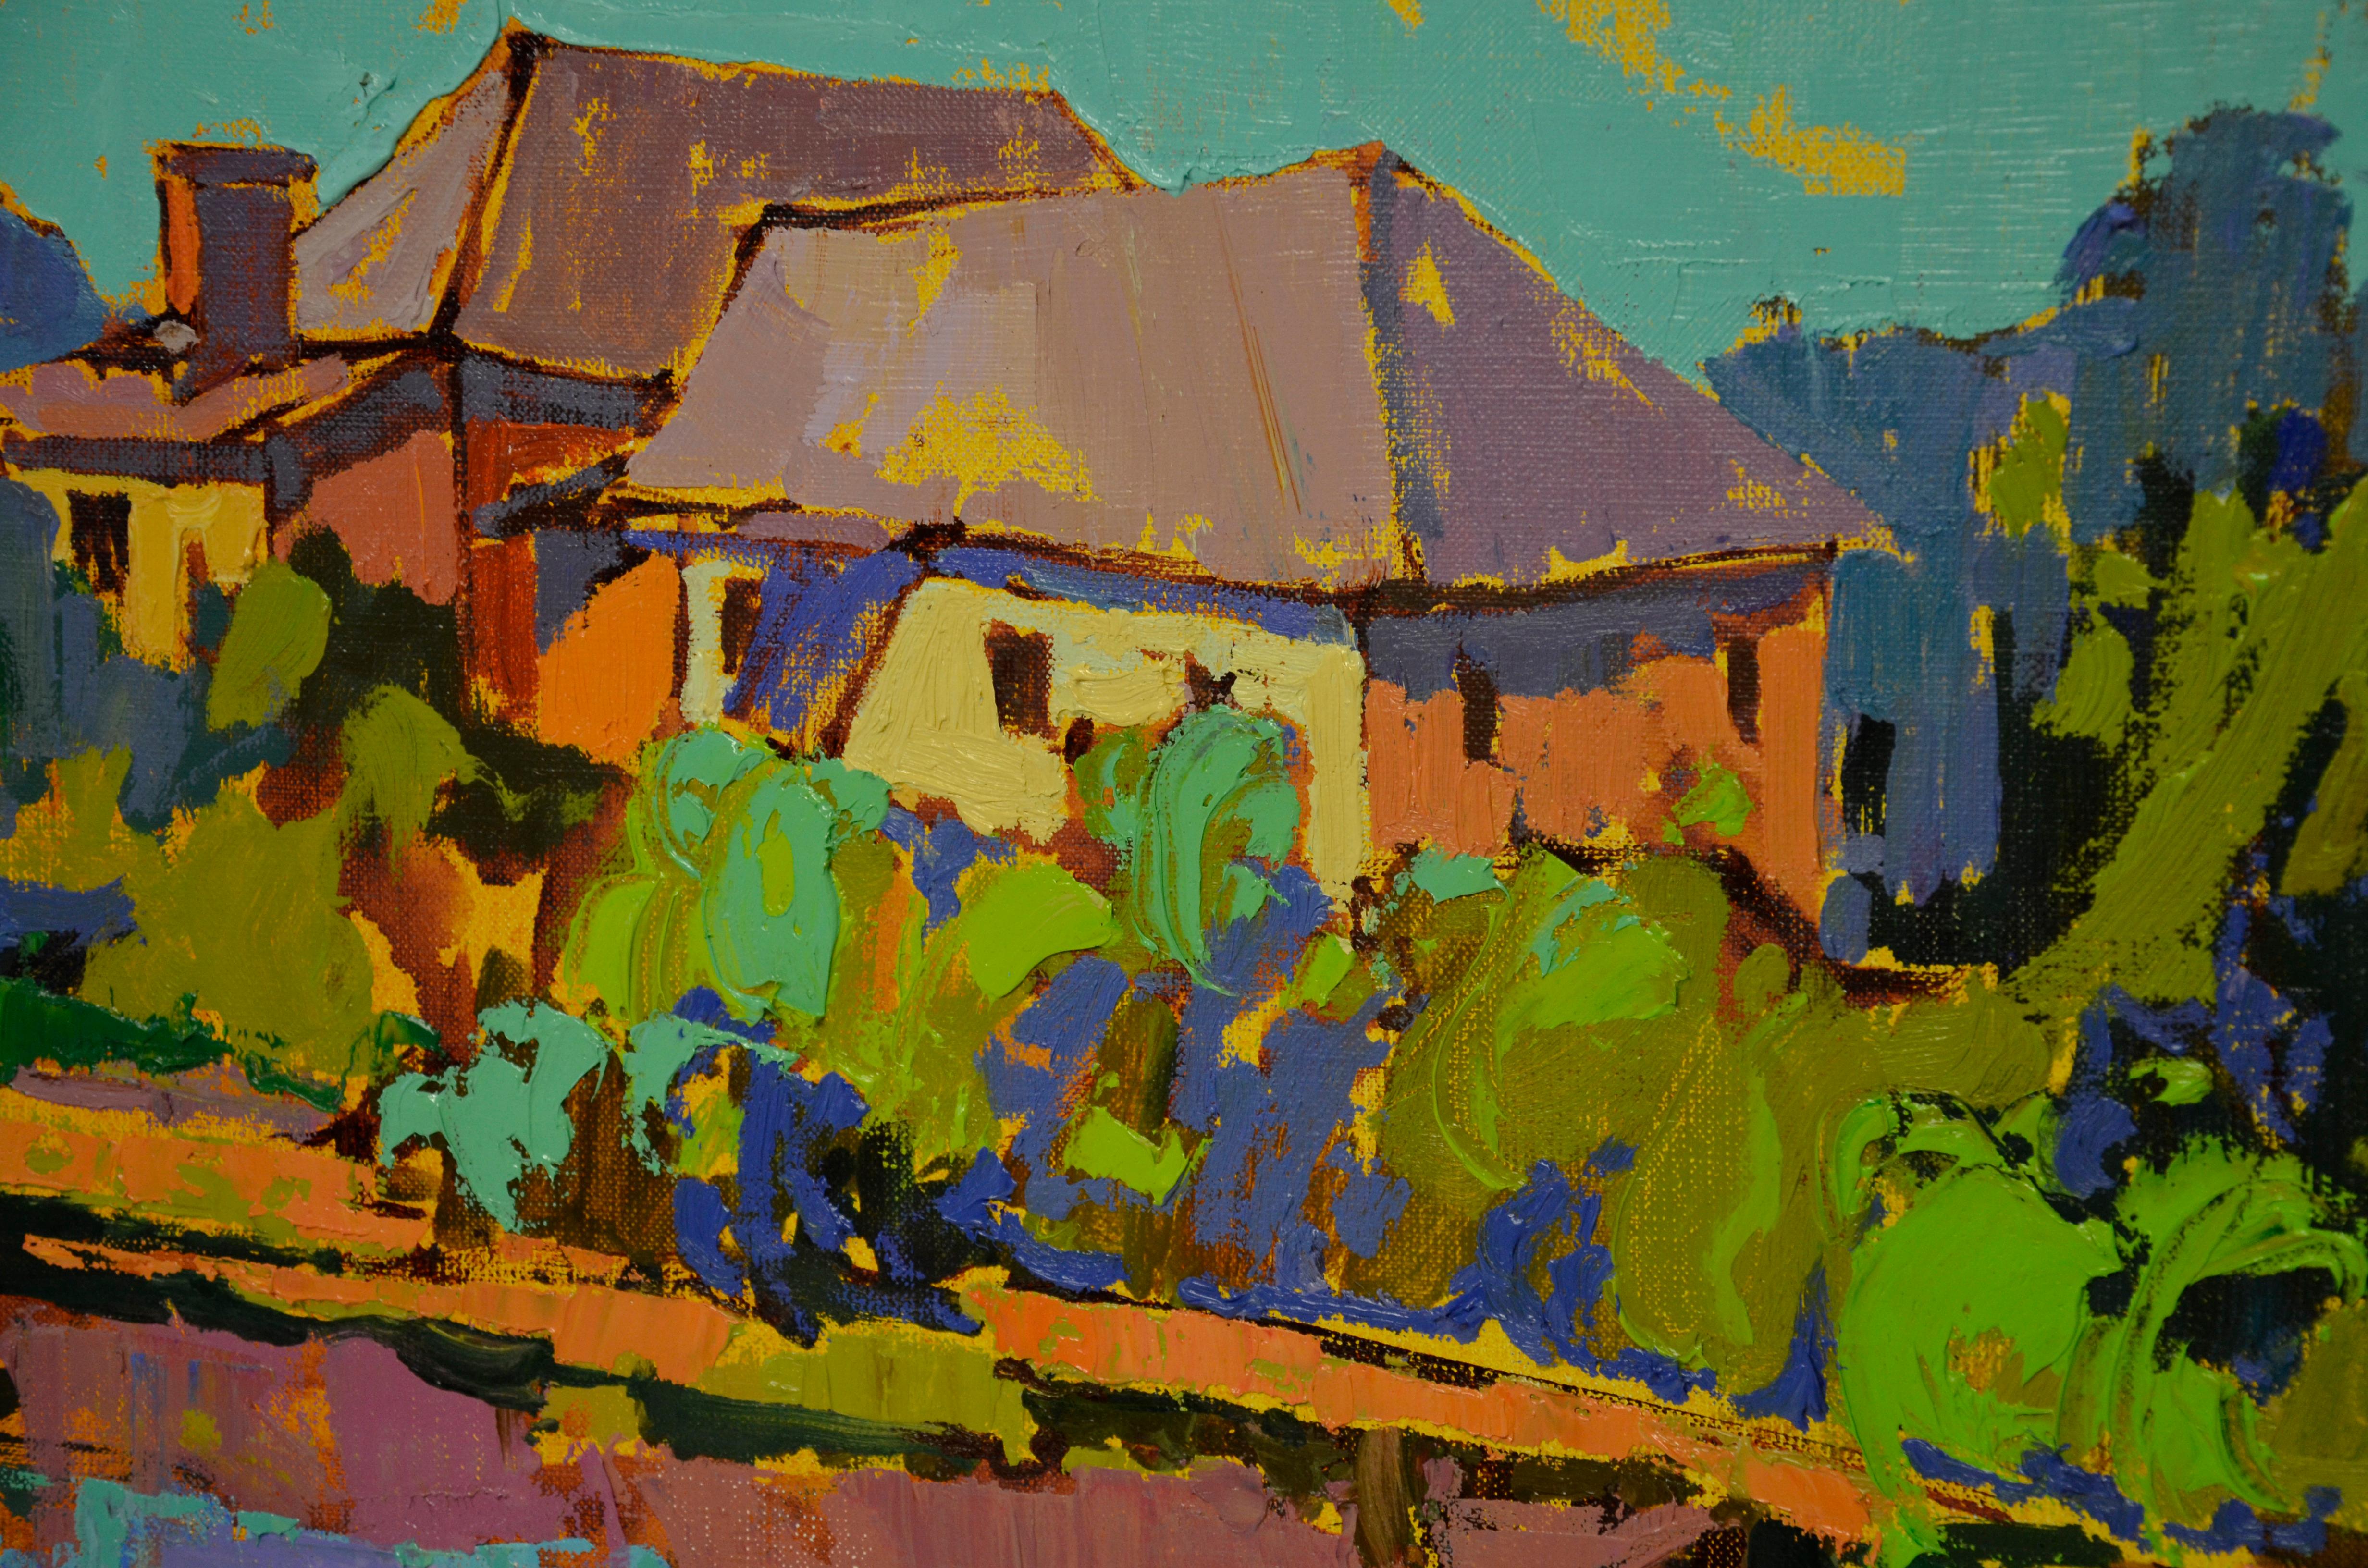 Lake Houses - Landscape Painting Color Blue Yellow Grey Black Orange Brown Green 1